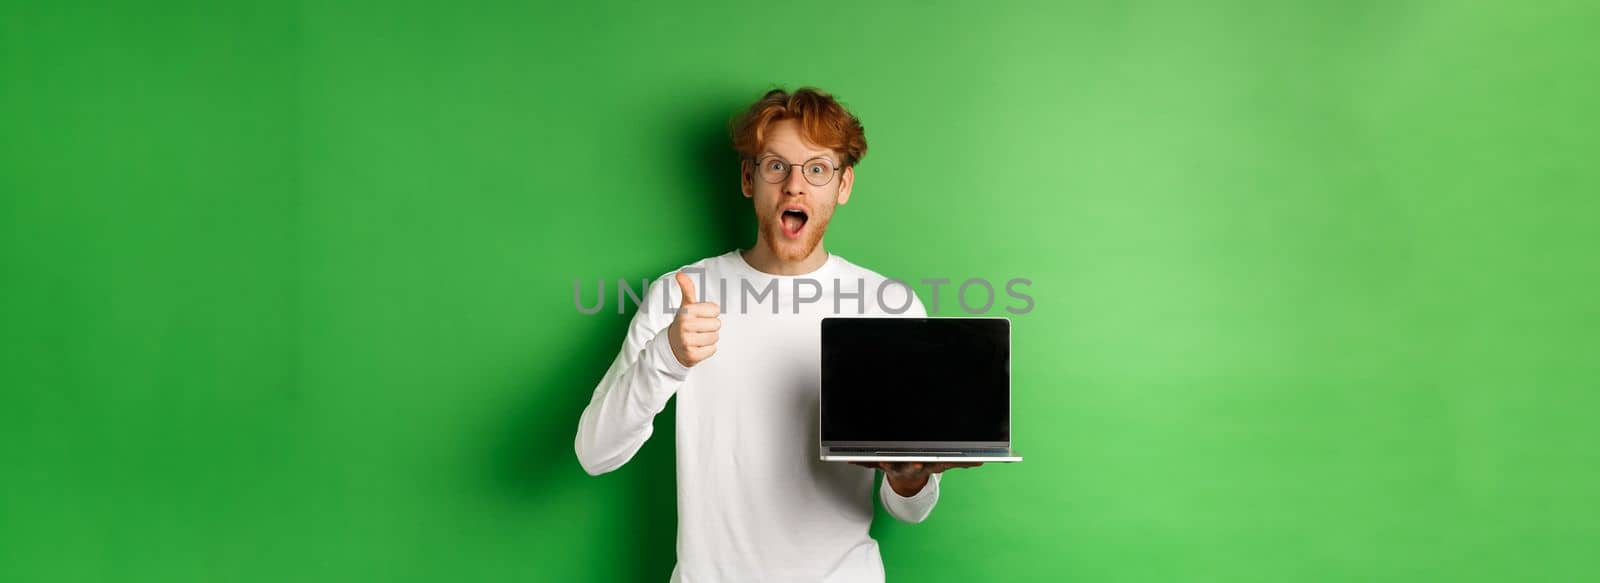 Impressed caucasian man with red hair and beard, showing blank laptop screen and thumb-up, looking amazed at camera, praising something online, green background.